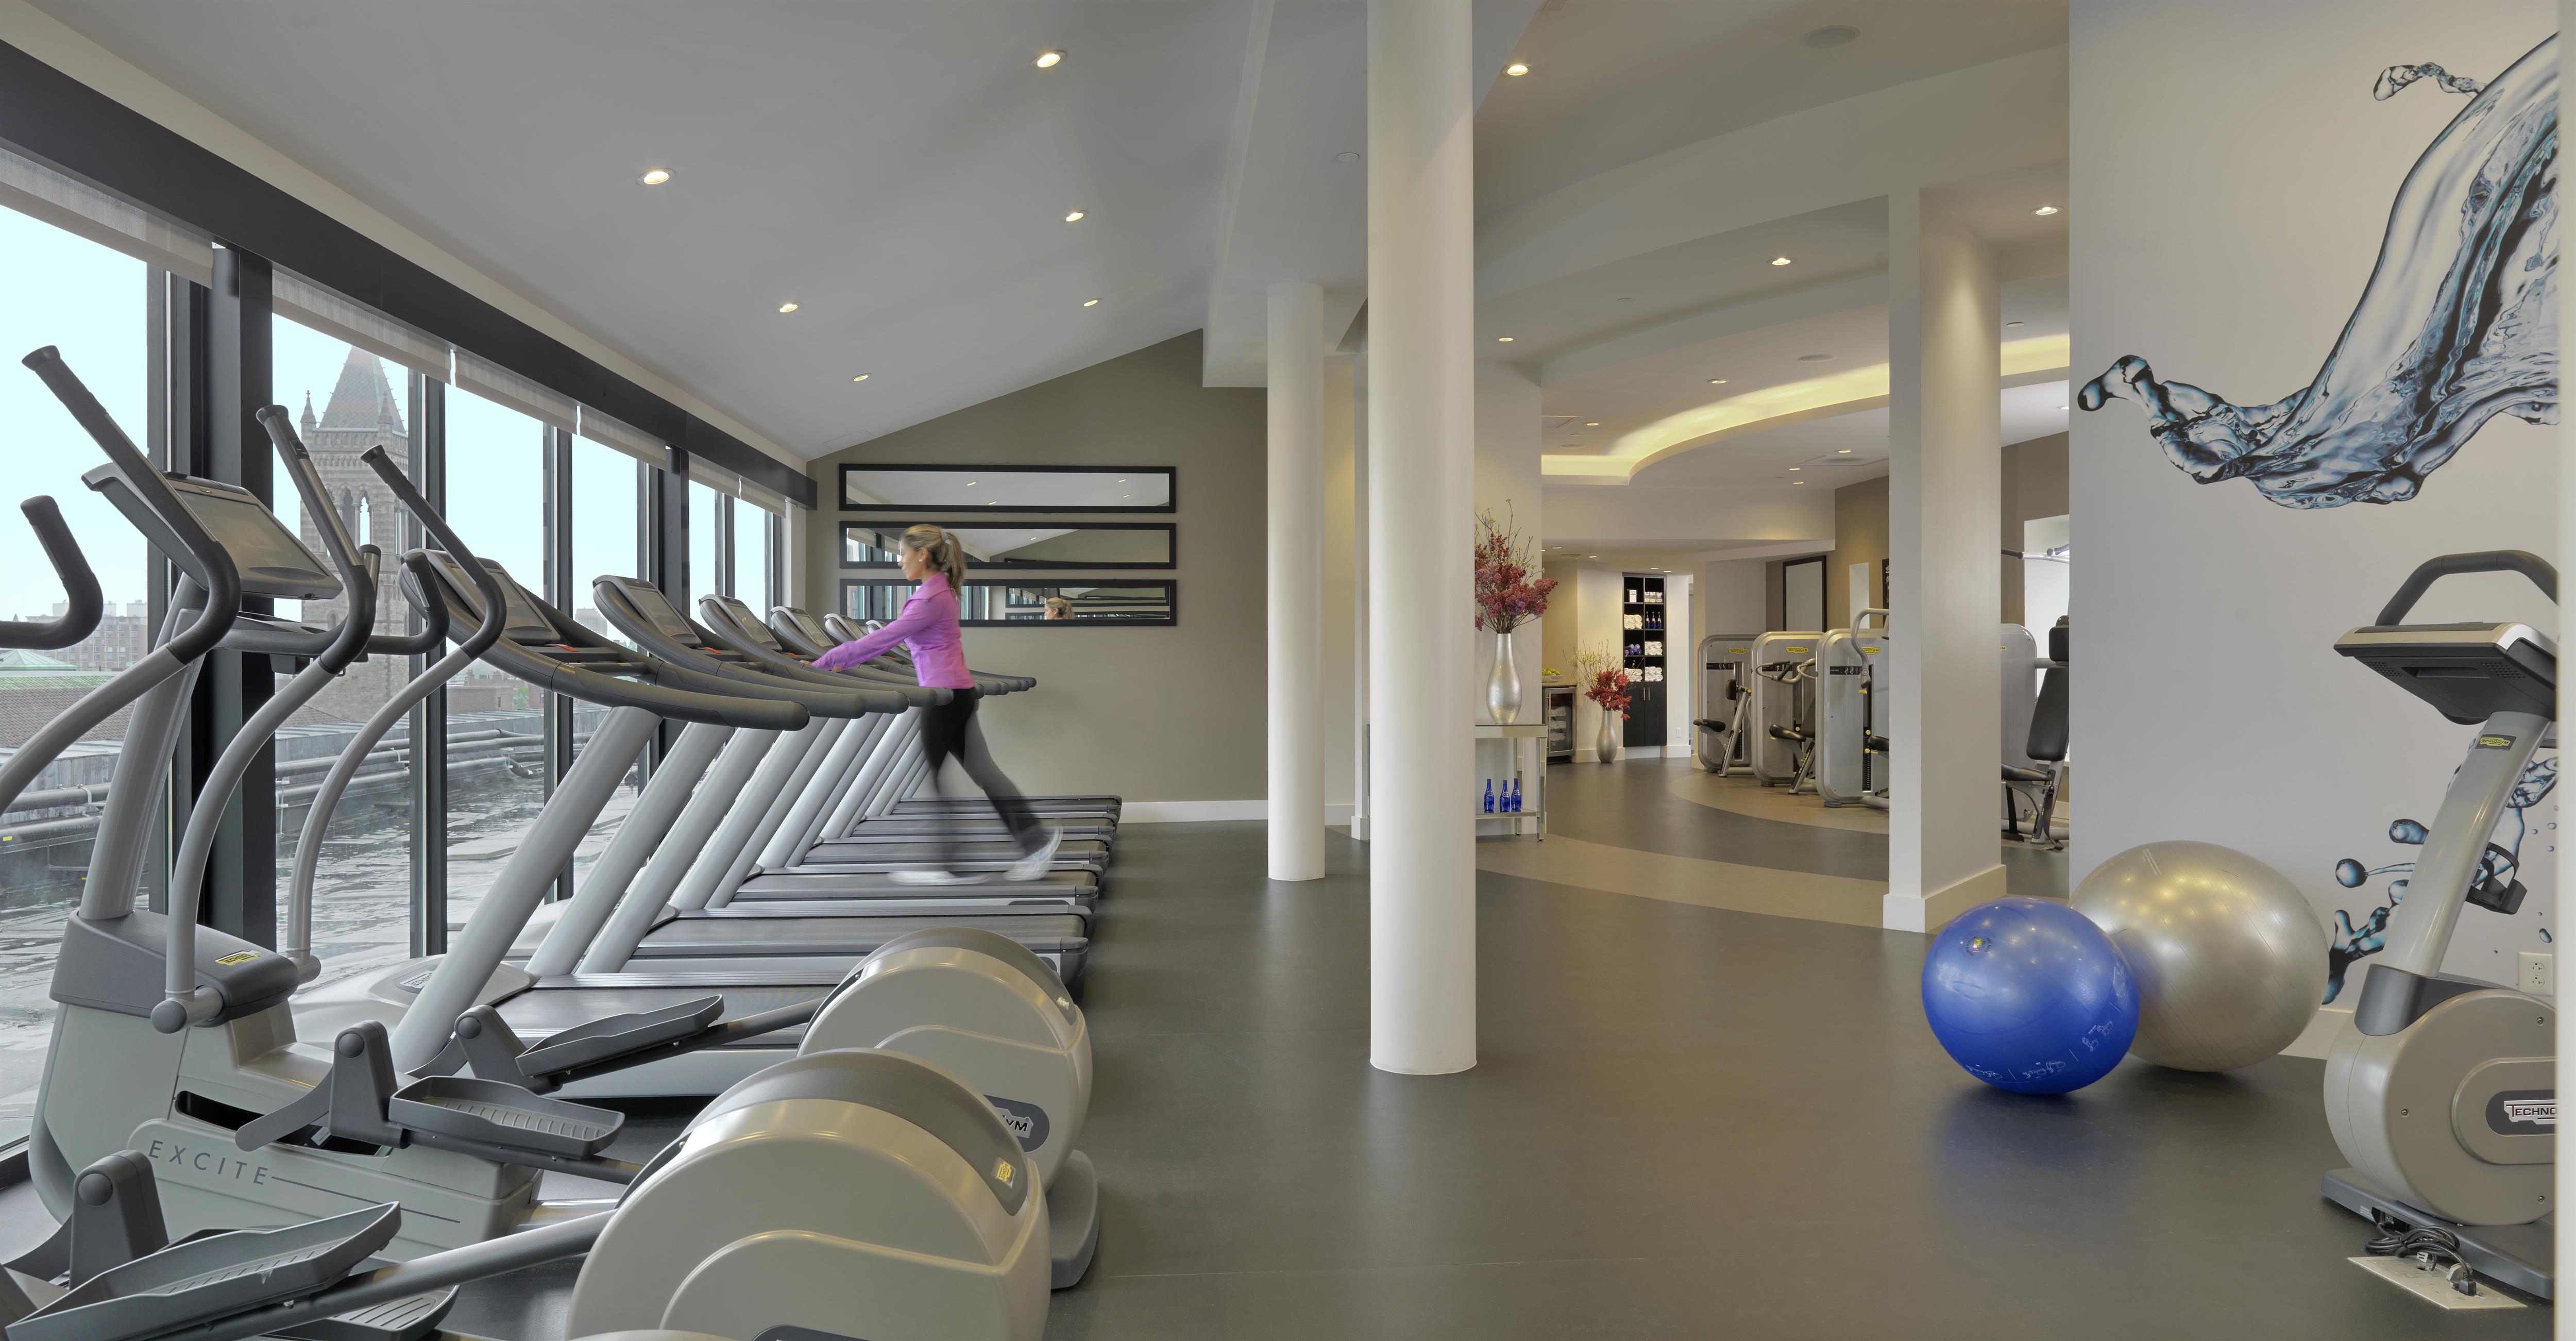 Fairmont Copley Plaza offers complimentary on-site workout facilities in a state of the art 3,000 square-foot, downtown rooftop health club.